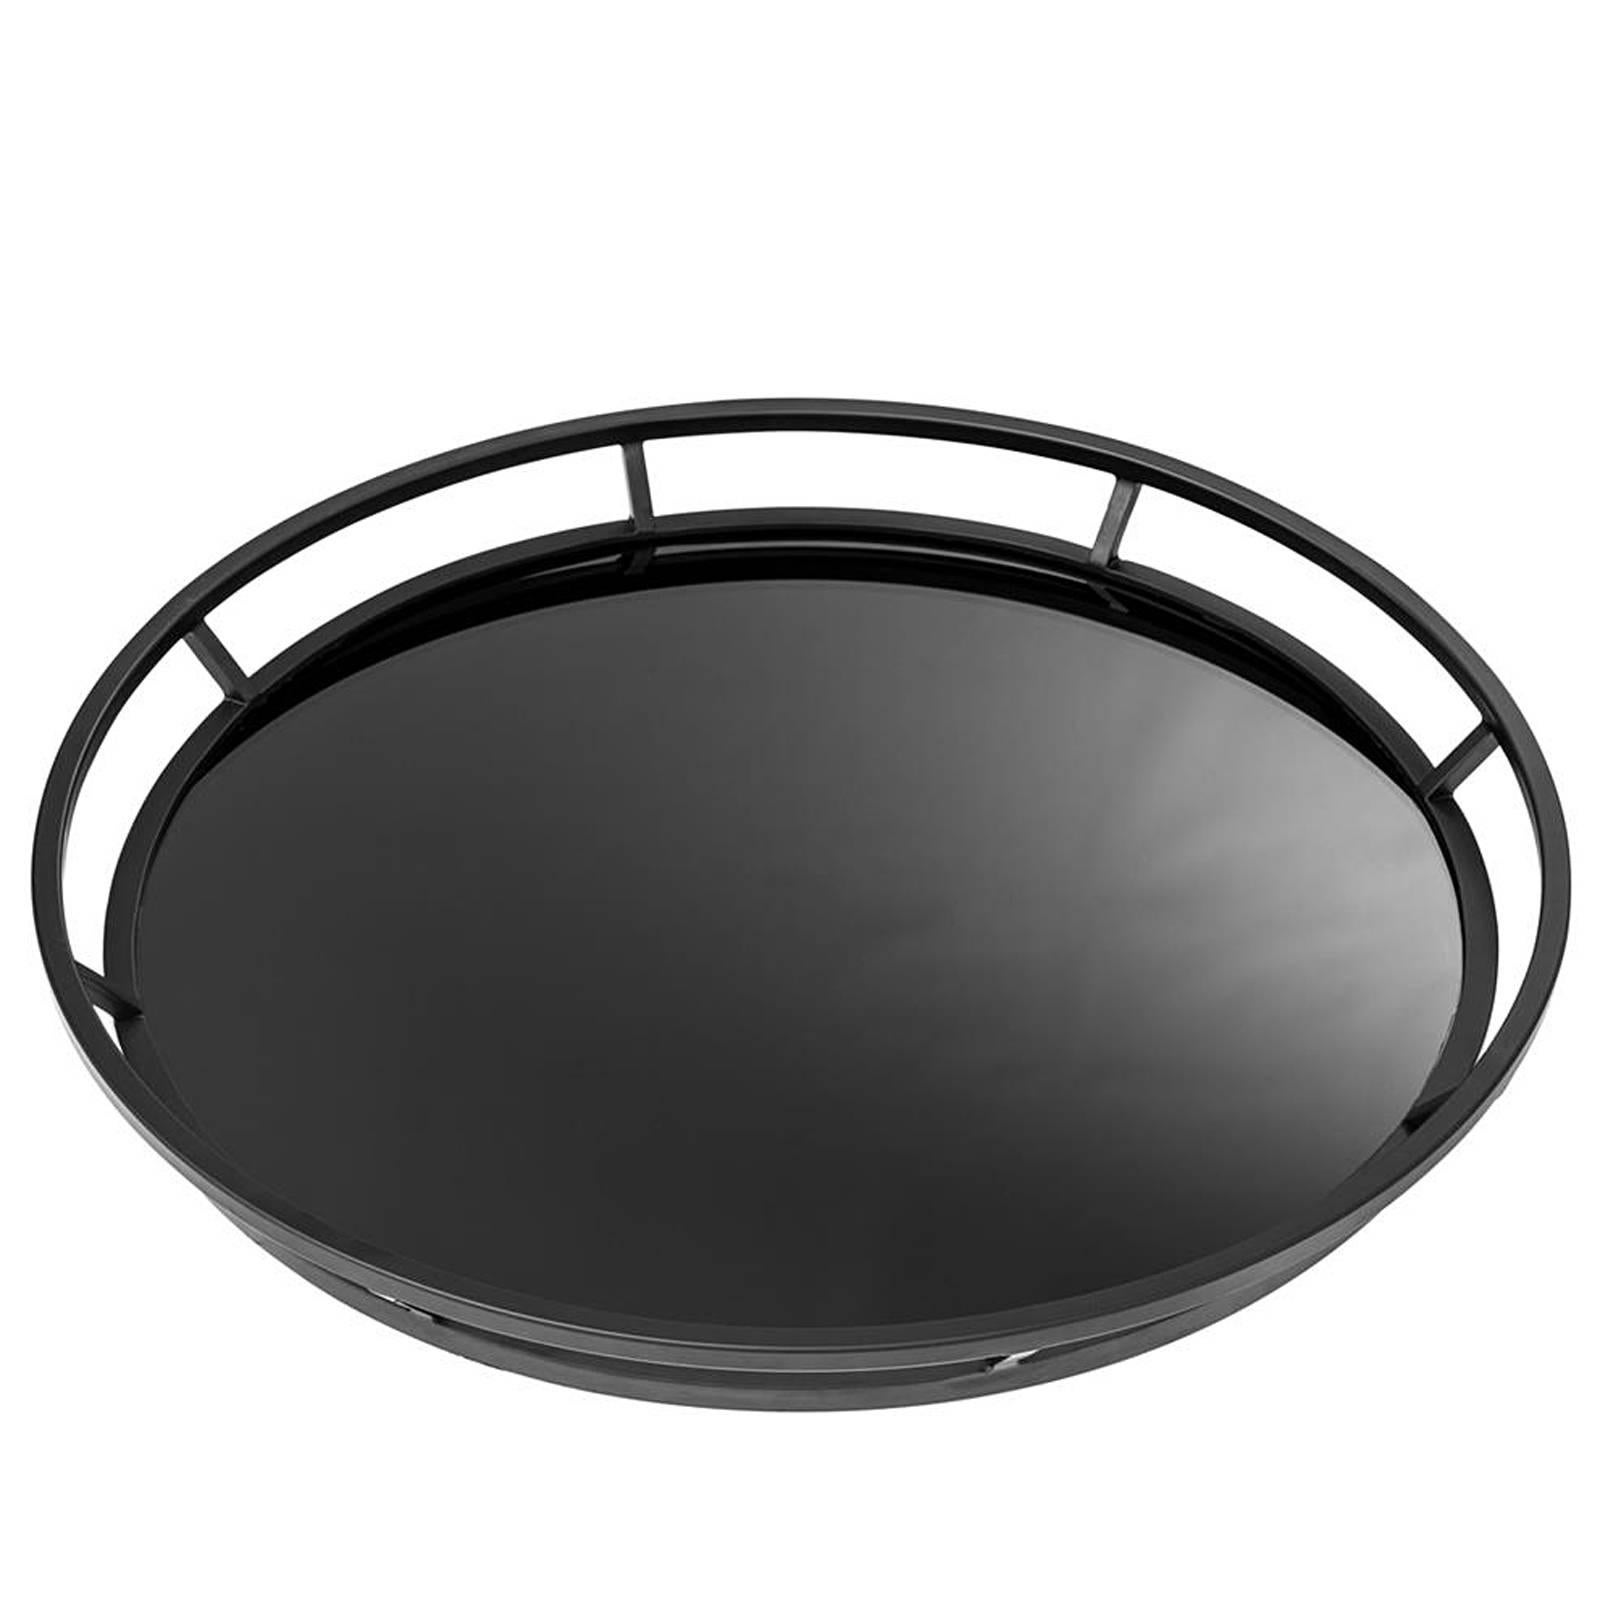 Round tray black in stainless steel matte 
black finish with black mirror glass.
